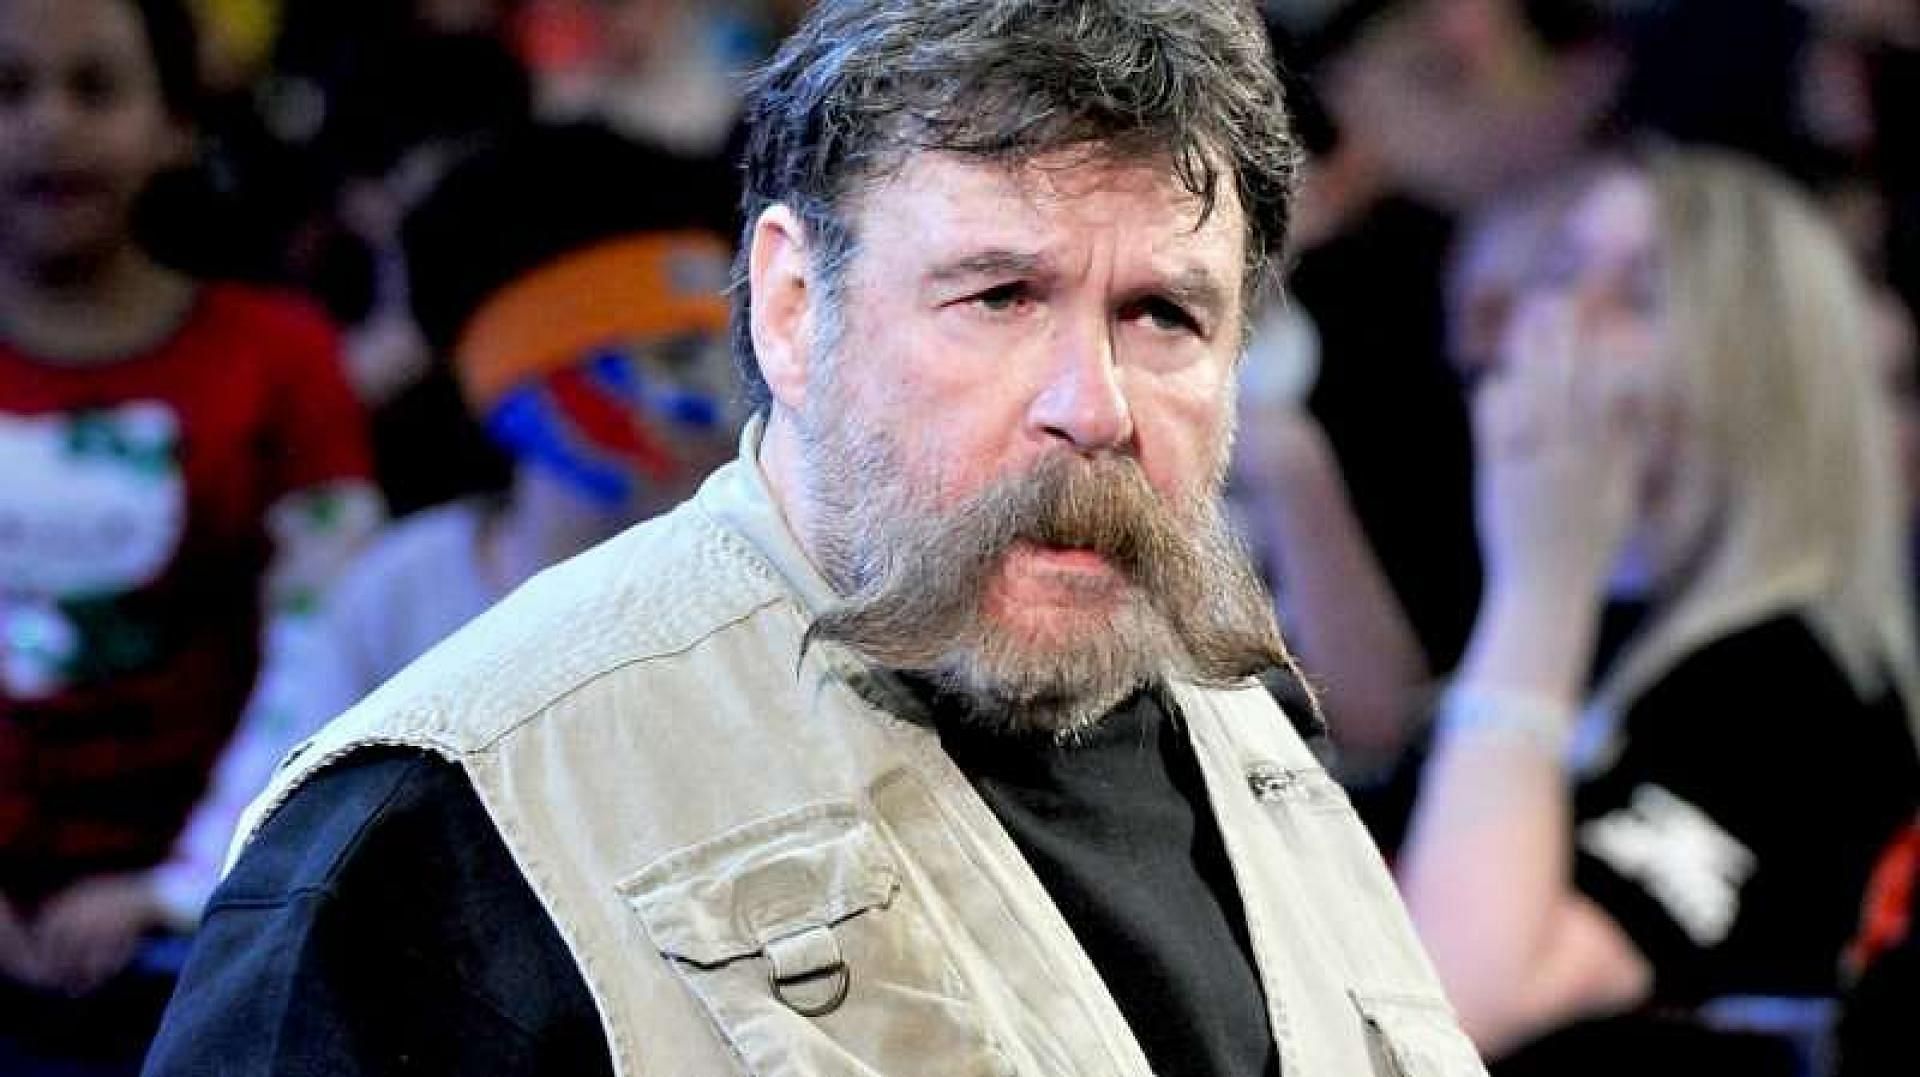 Dutch Mantell is best known for his time in WWE as a manager.